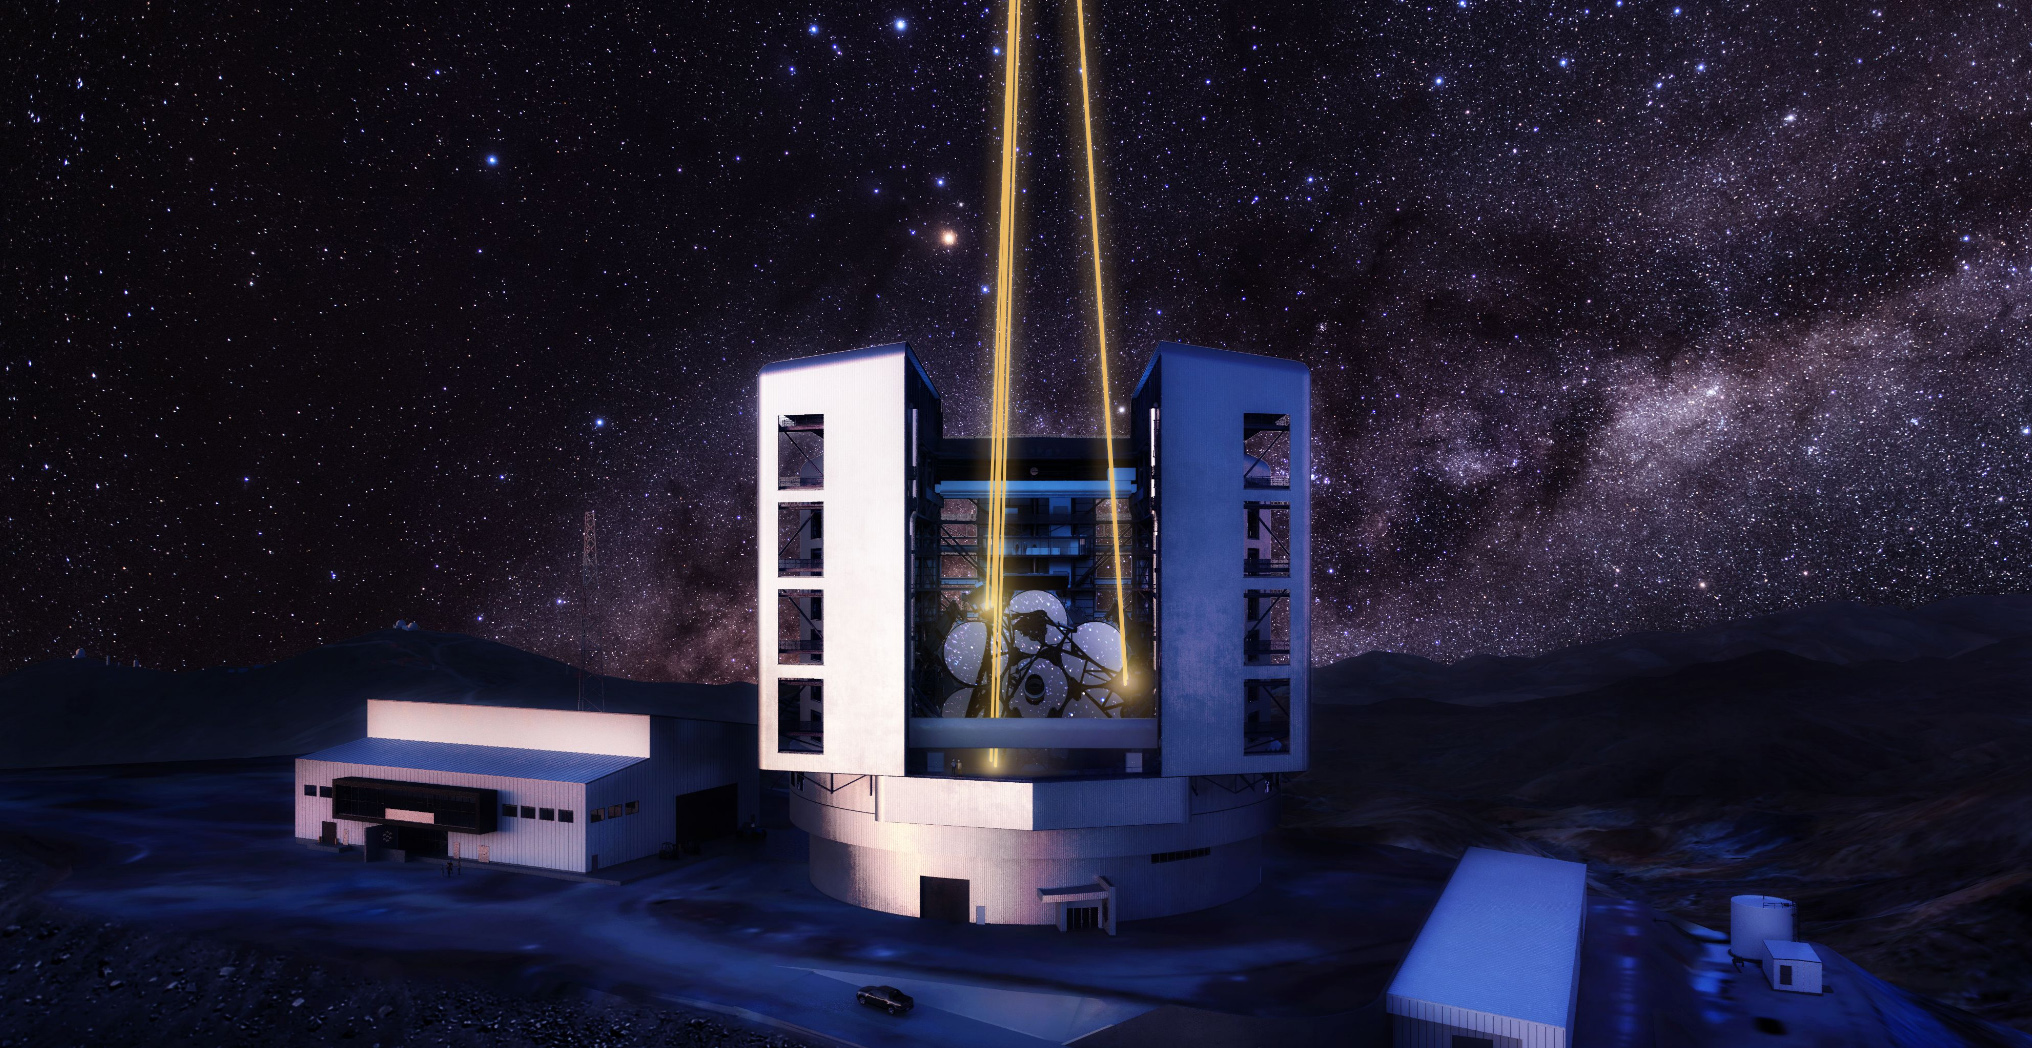 Nighttime exterior Giant Magellan Telescope rendering with support site buildings in the foreground at Las Campanas Observatory in Chile’s Atacama Desert